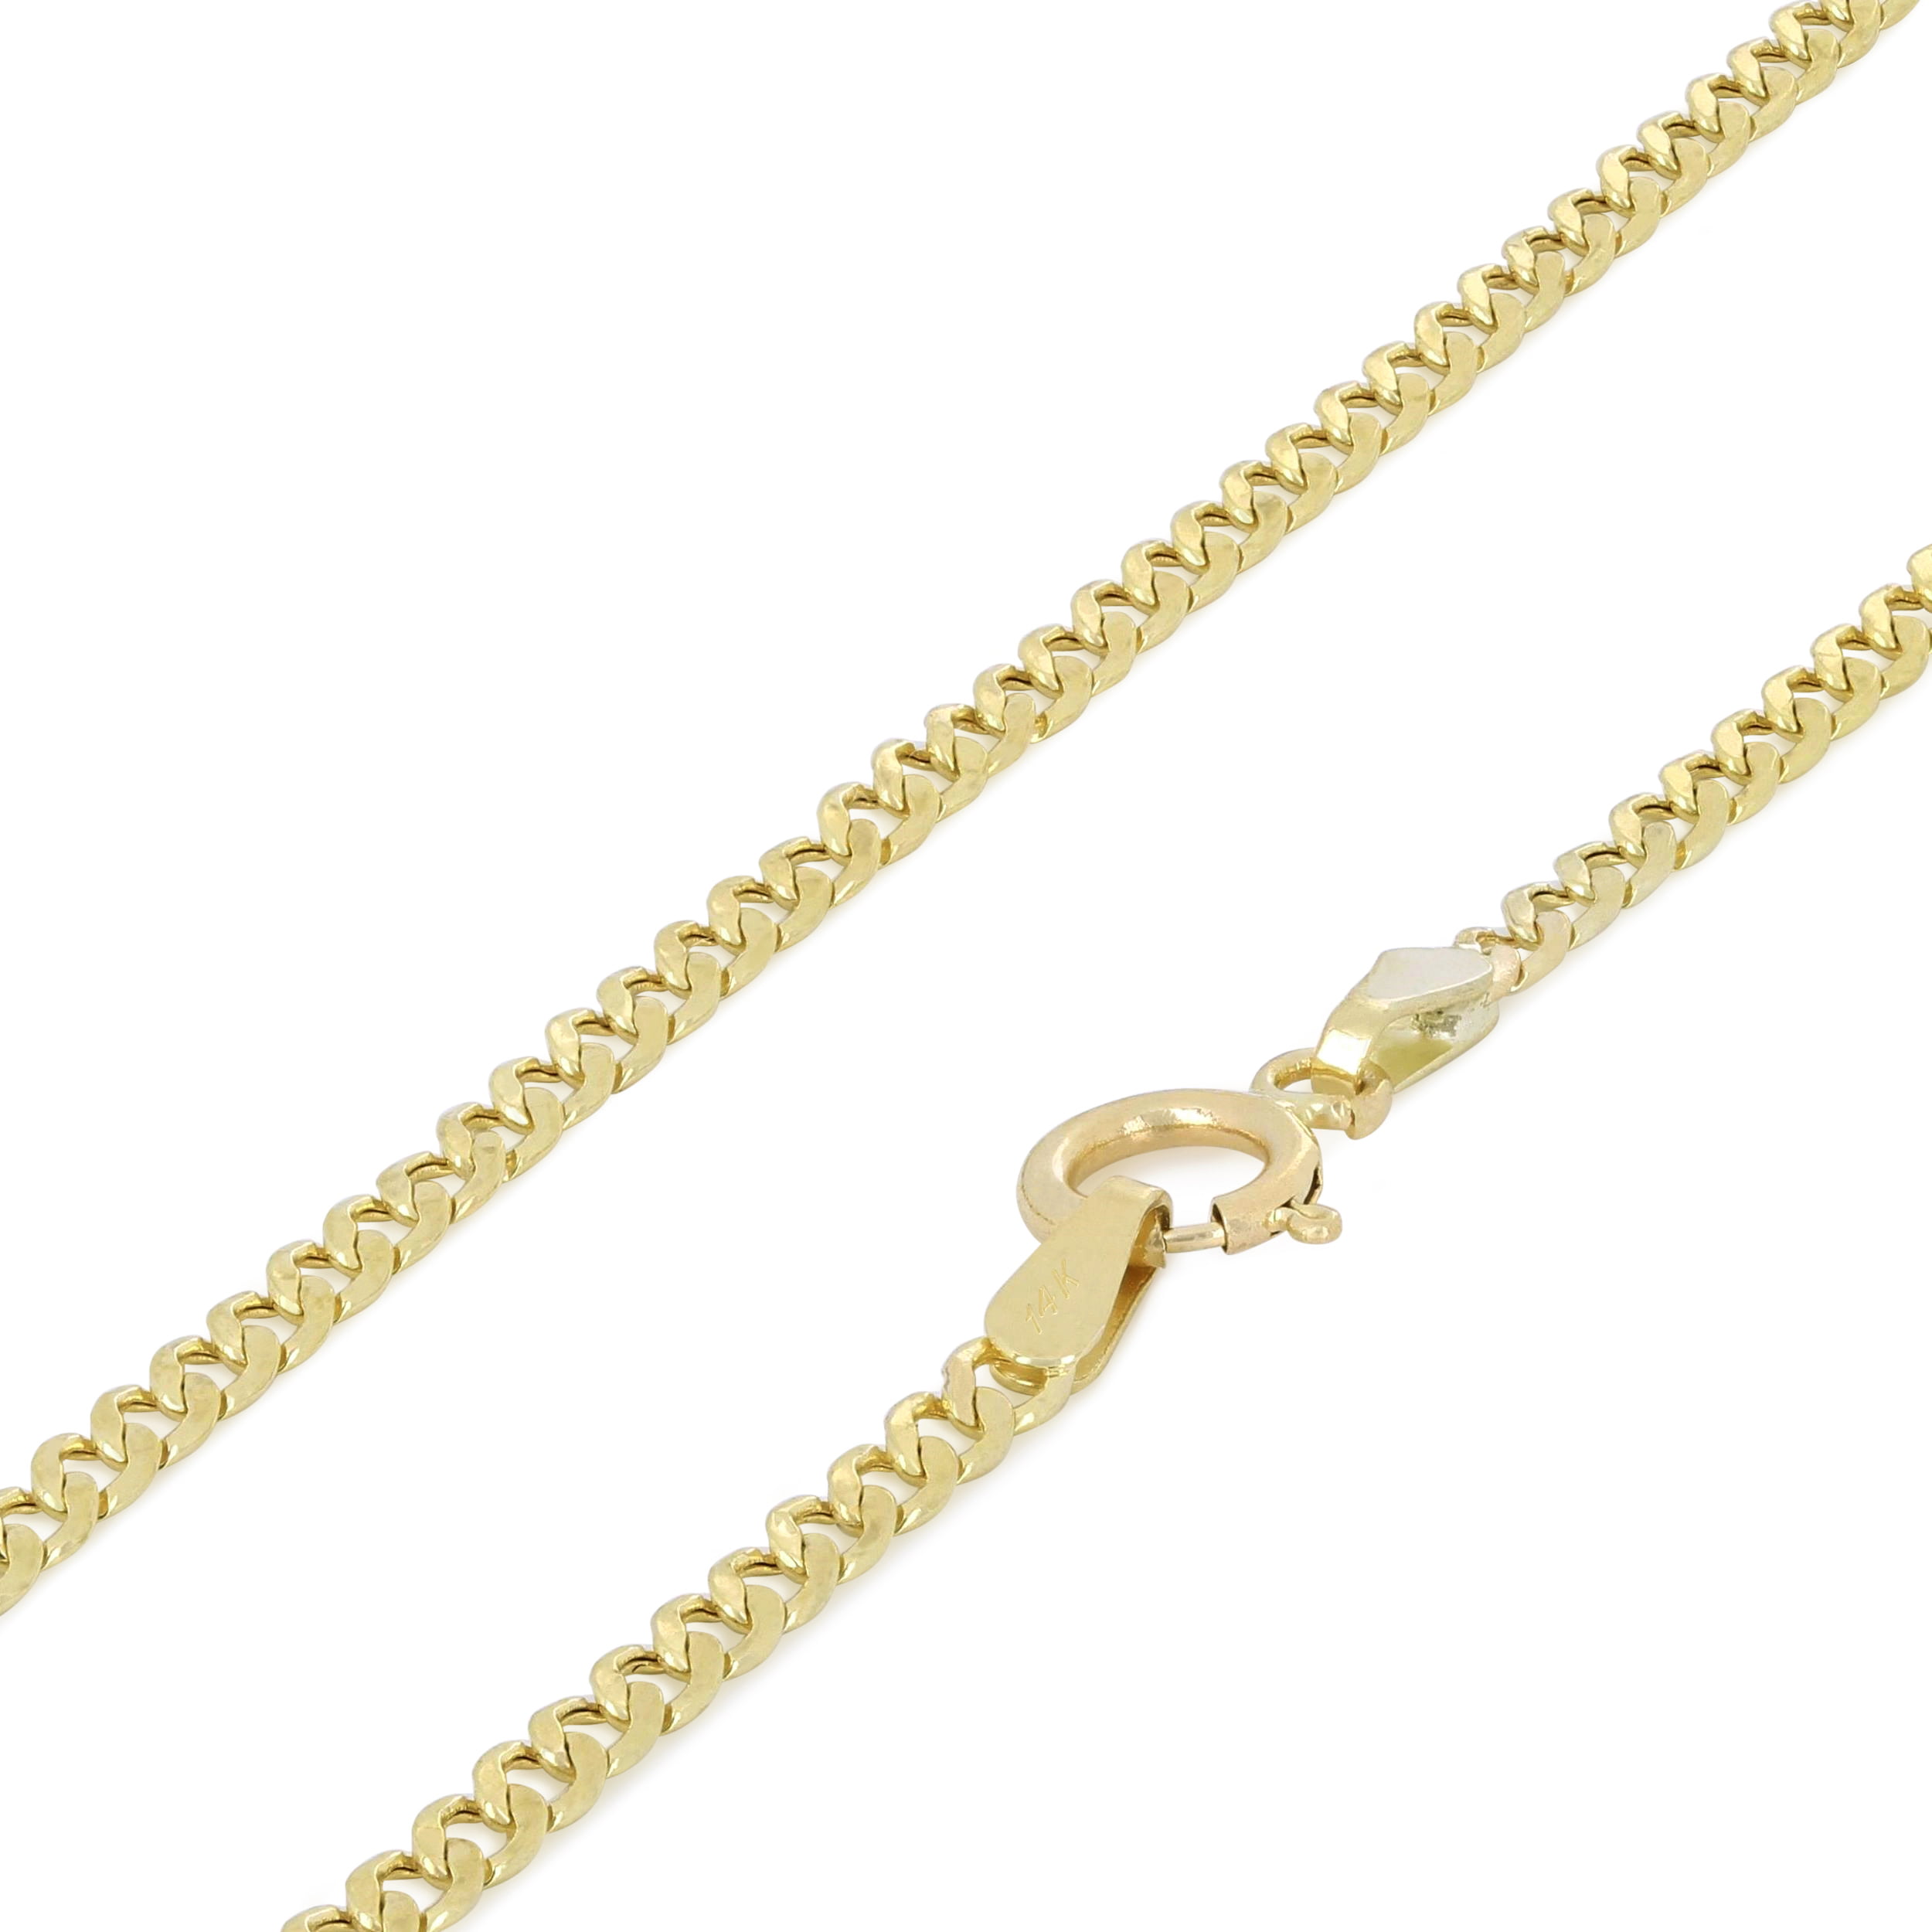 Sonia Jewels 14k White and Yellow Gold Two Tone Curb Concave White Pave Chain Necklace With Lobster Claw Clasp